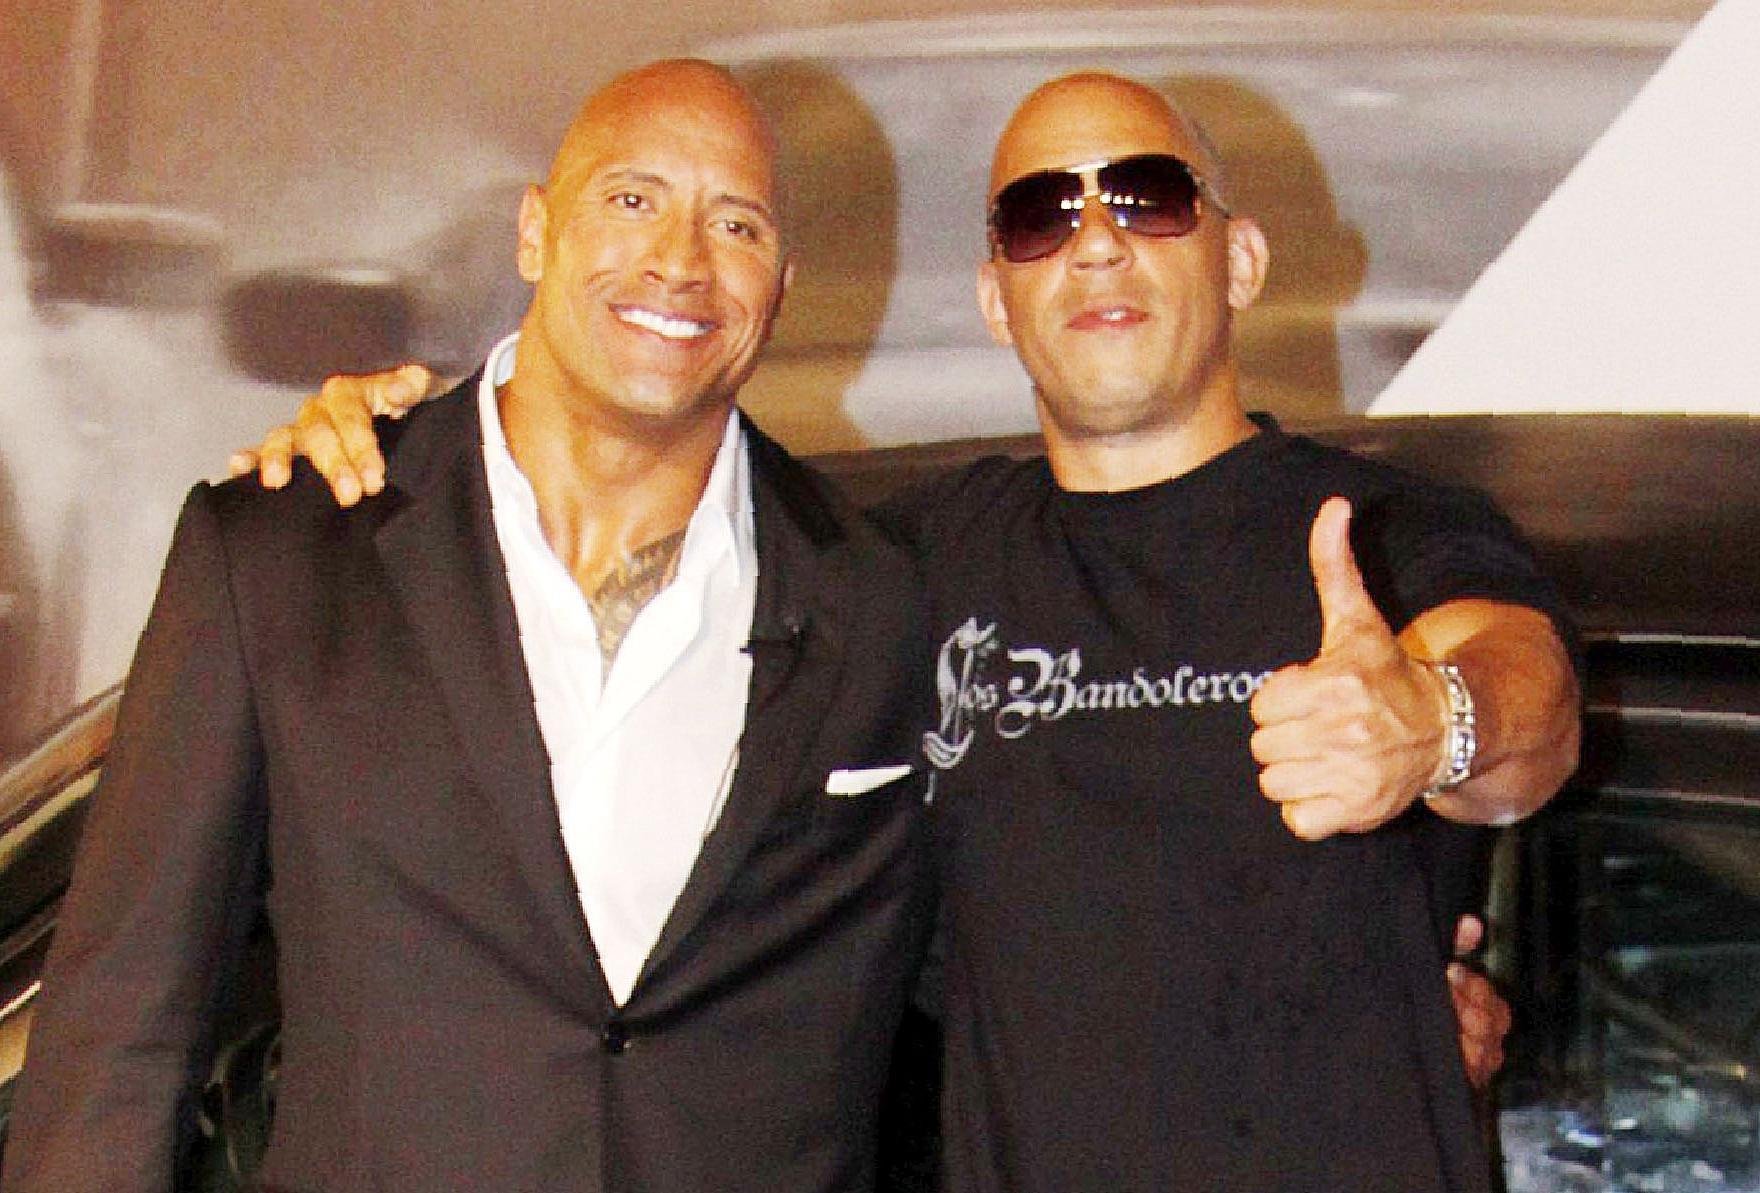 Dwayne 'The Rock' Johnson opens up on his feud with co-star Vin Diesel